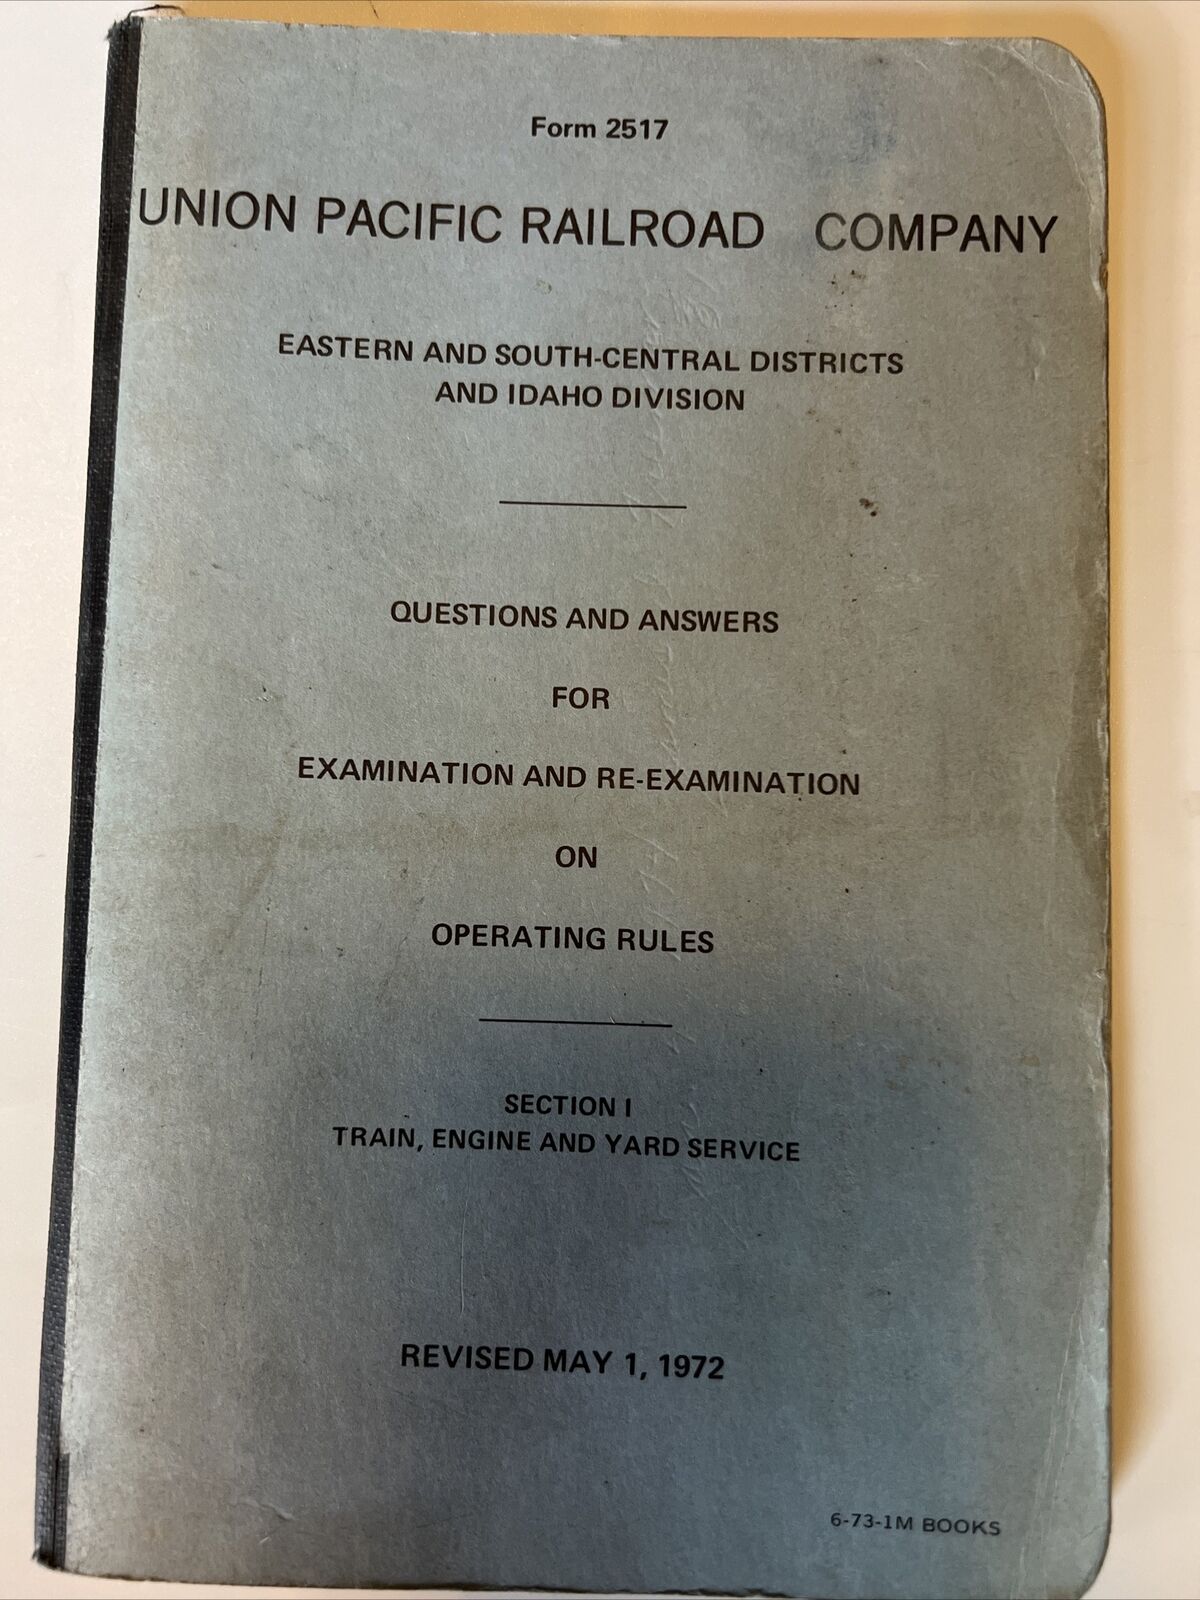 Vtg UNION PACIFIC RAILROAD Company Form 2517 EXAM ANSWER BOOK May 1972